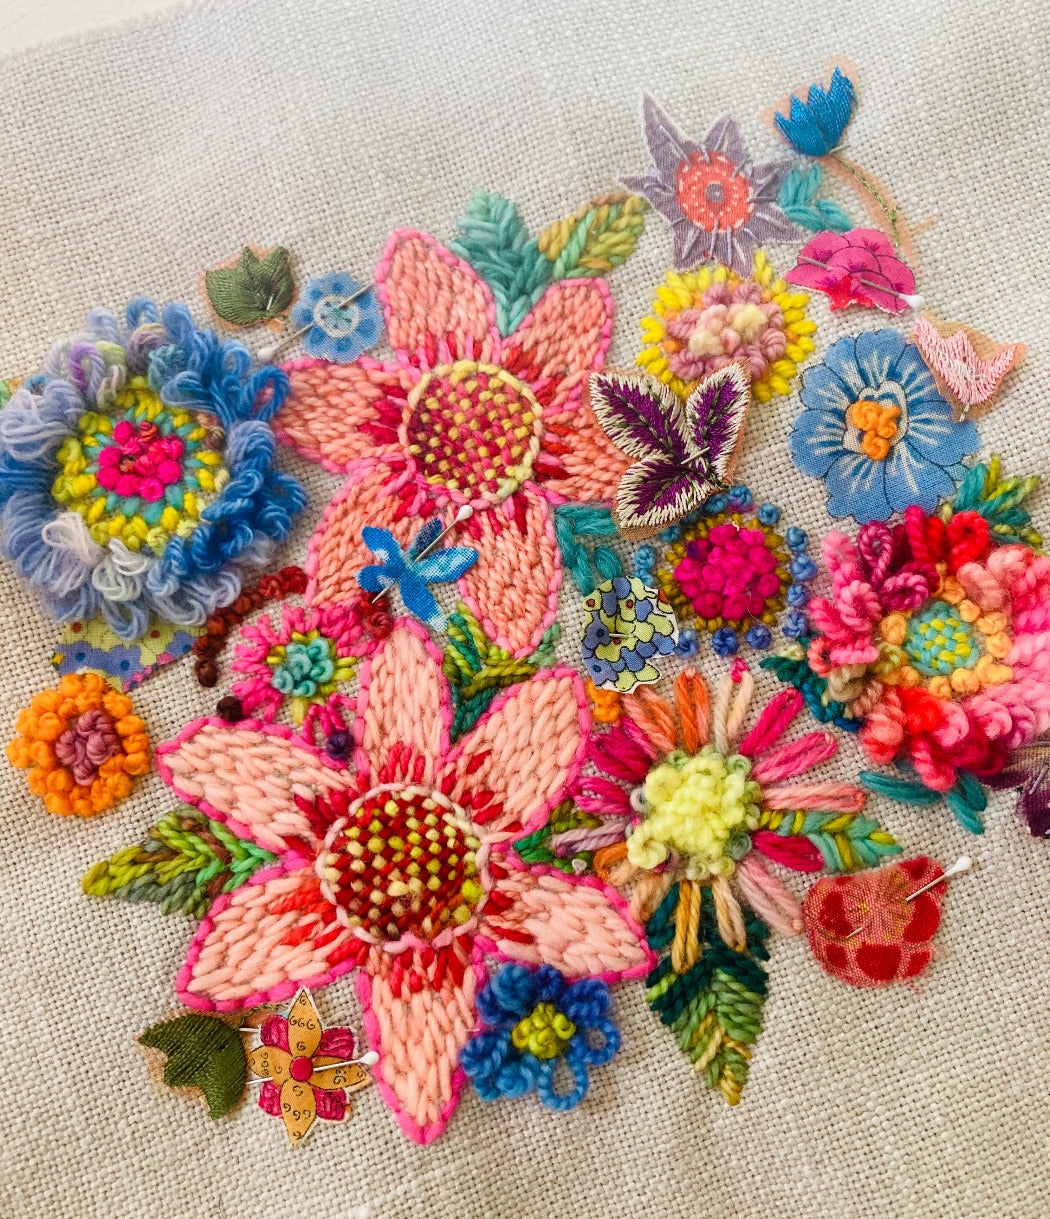 Fabric, Flowers and Stitch